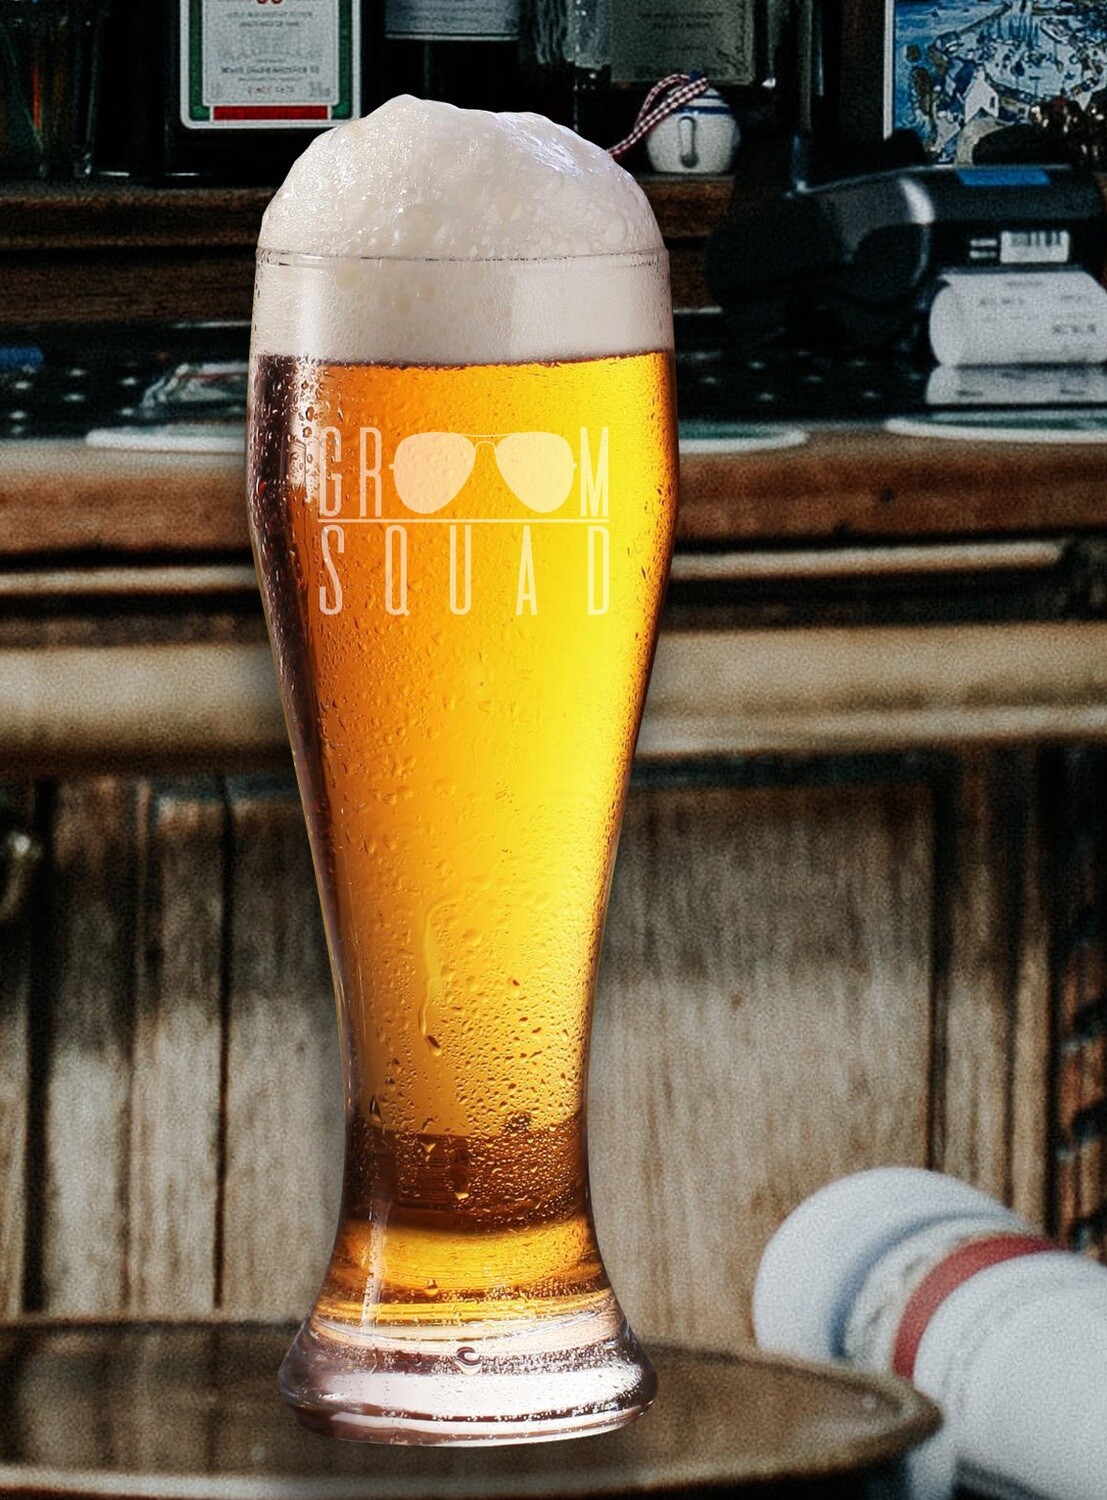 Personalized Groom Squad Beer Glass